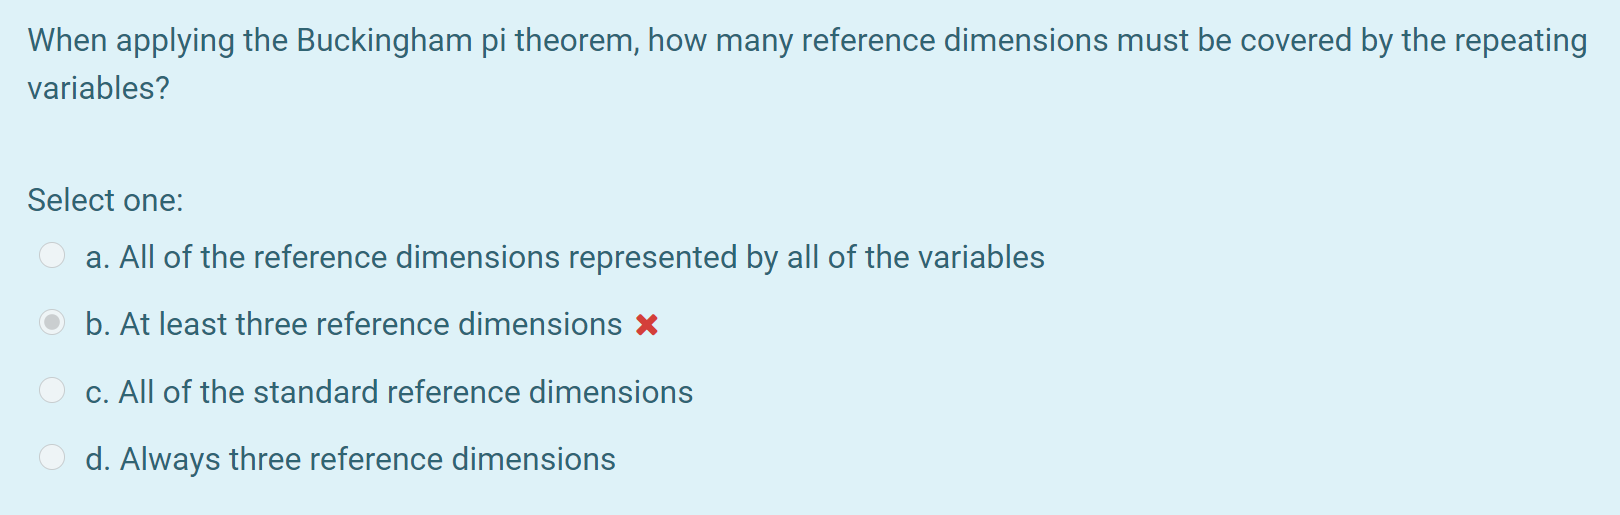 Dimensions and variables selected for the characterization of the